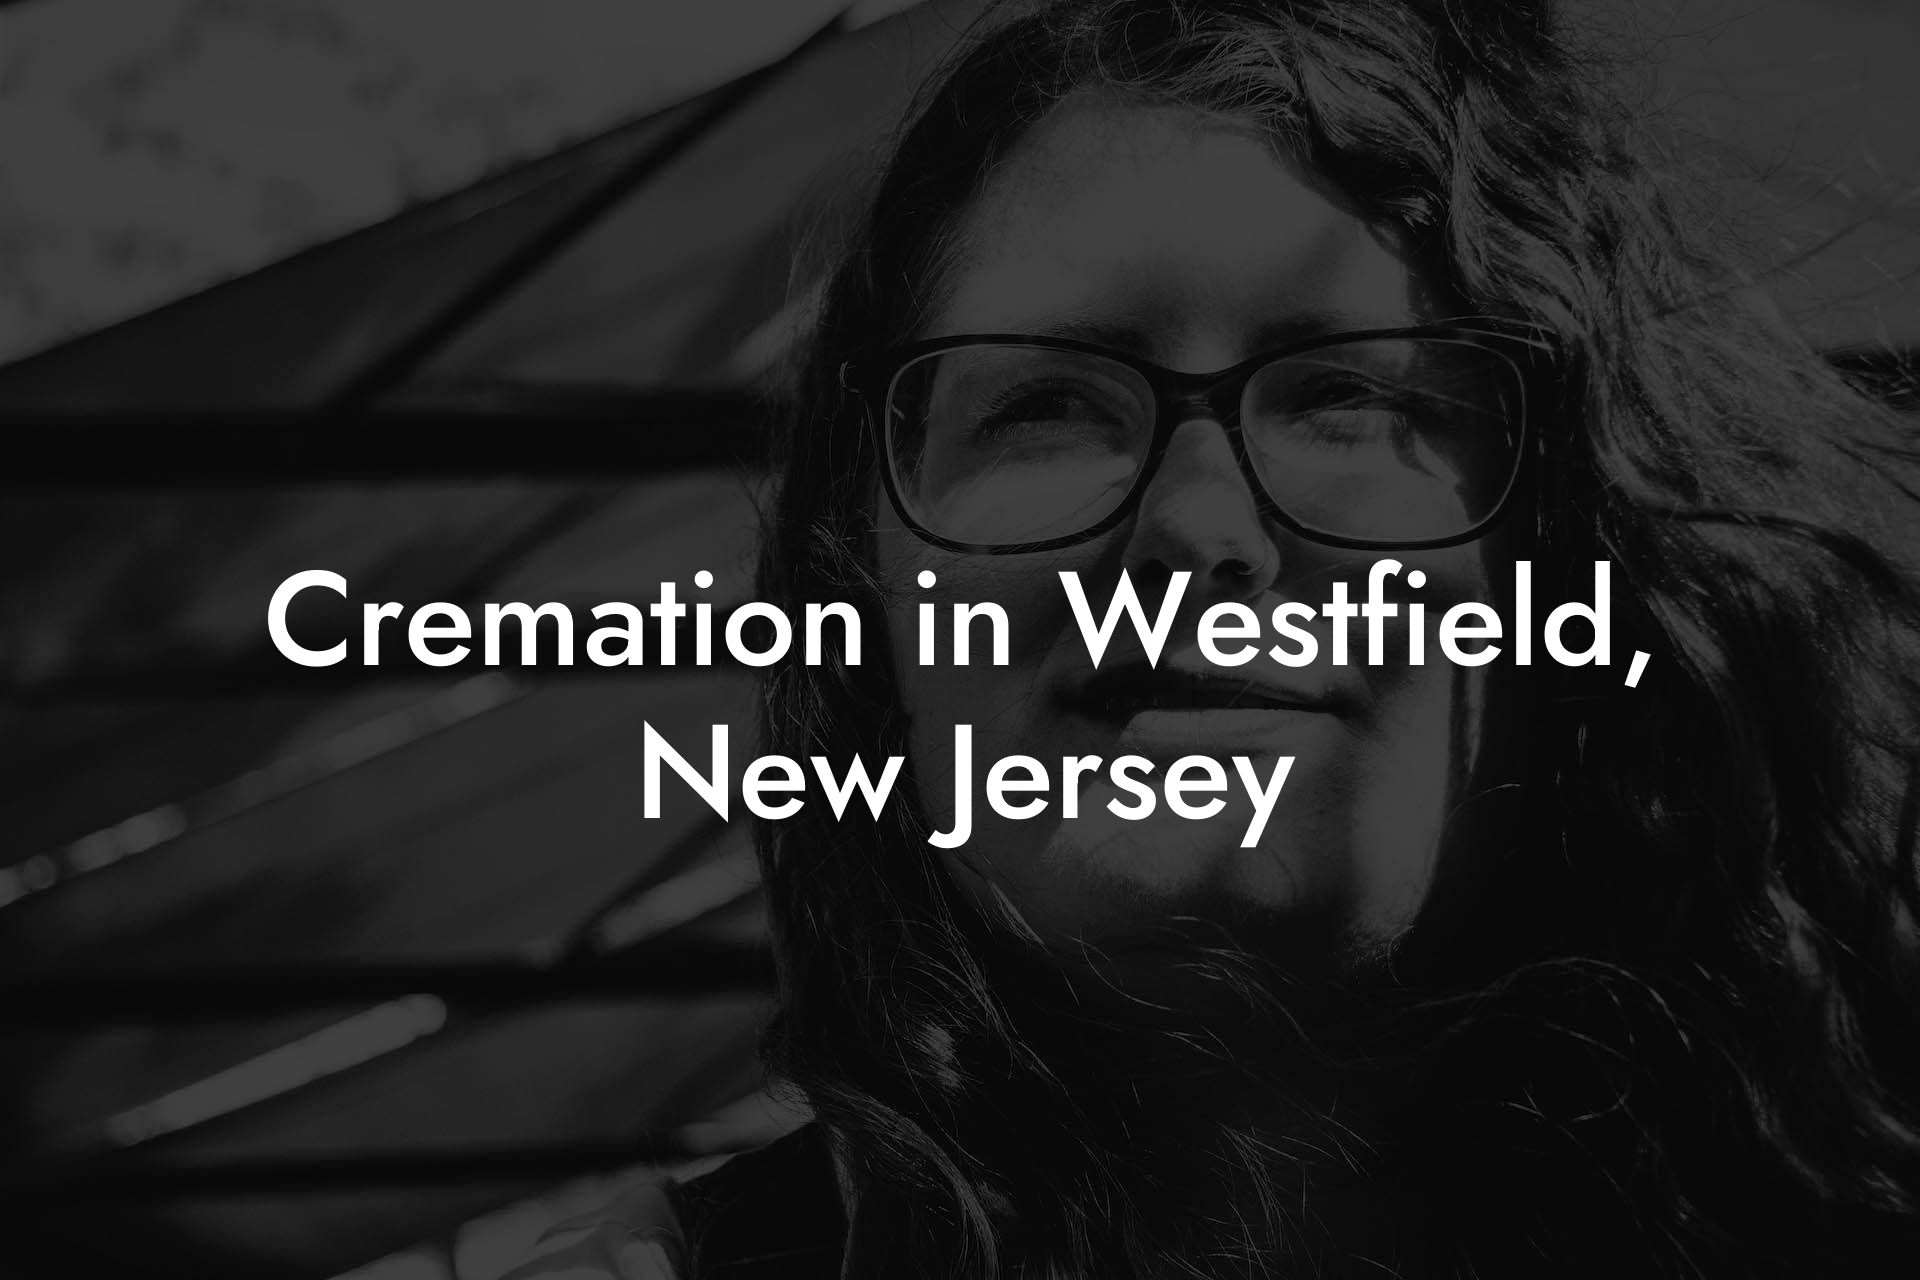 Cremation in Westfield, New Jersey